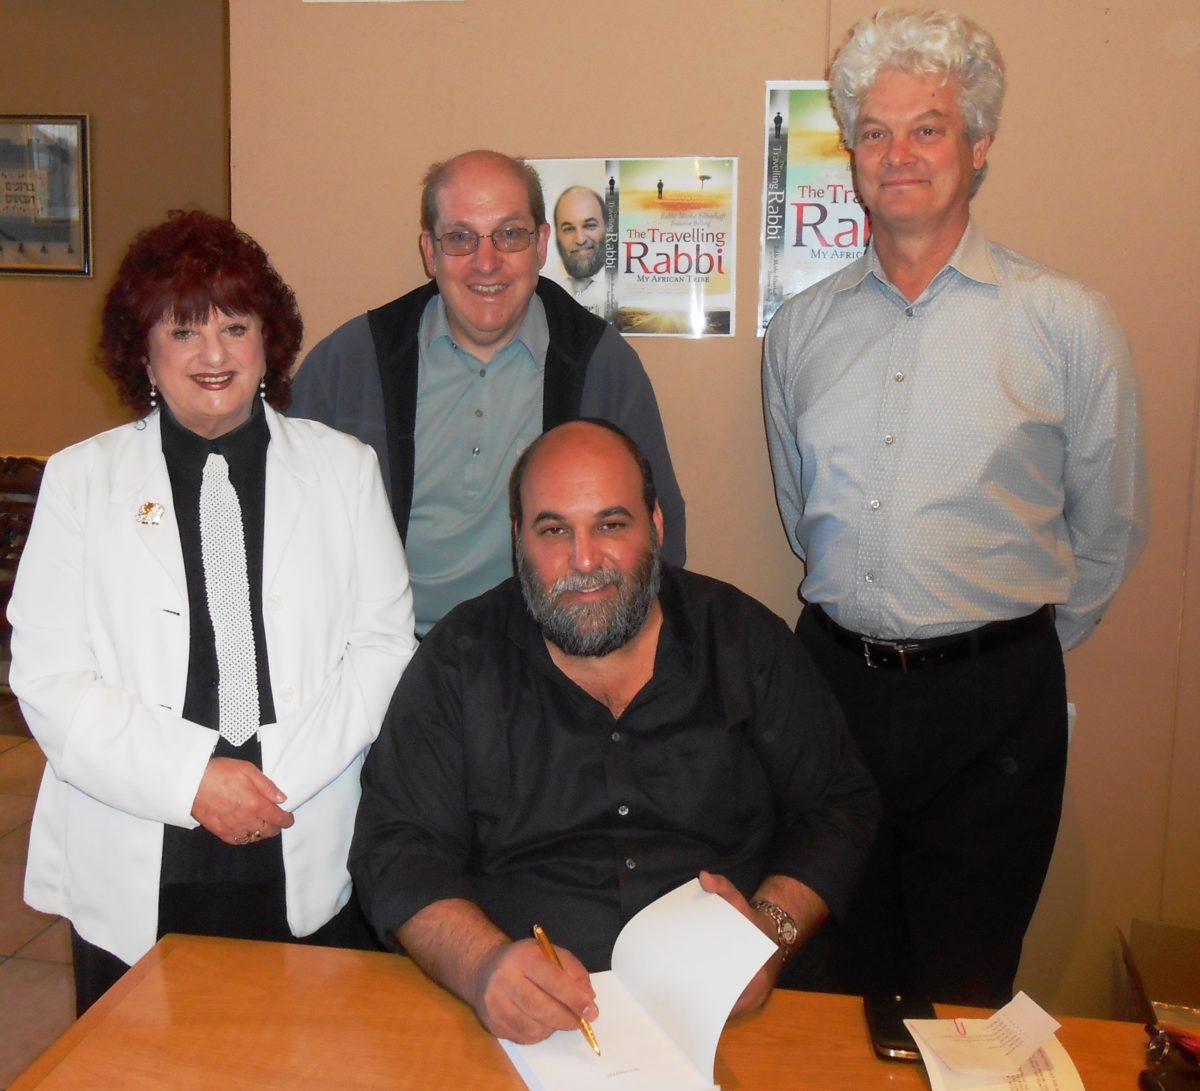 Suzanne Belling, with co-writer Rabbi Moshe Silberhaft and others at the launch of The Travelling Rabbi: My African Tribe, August 2012. . 